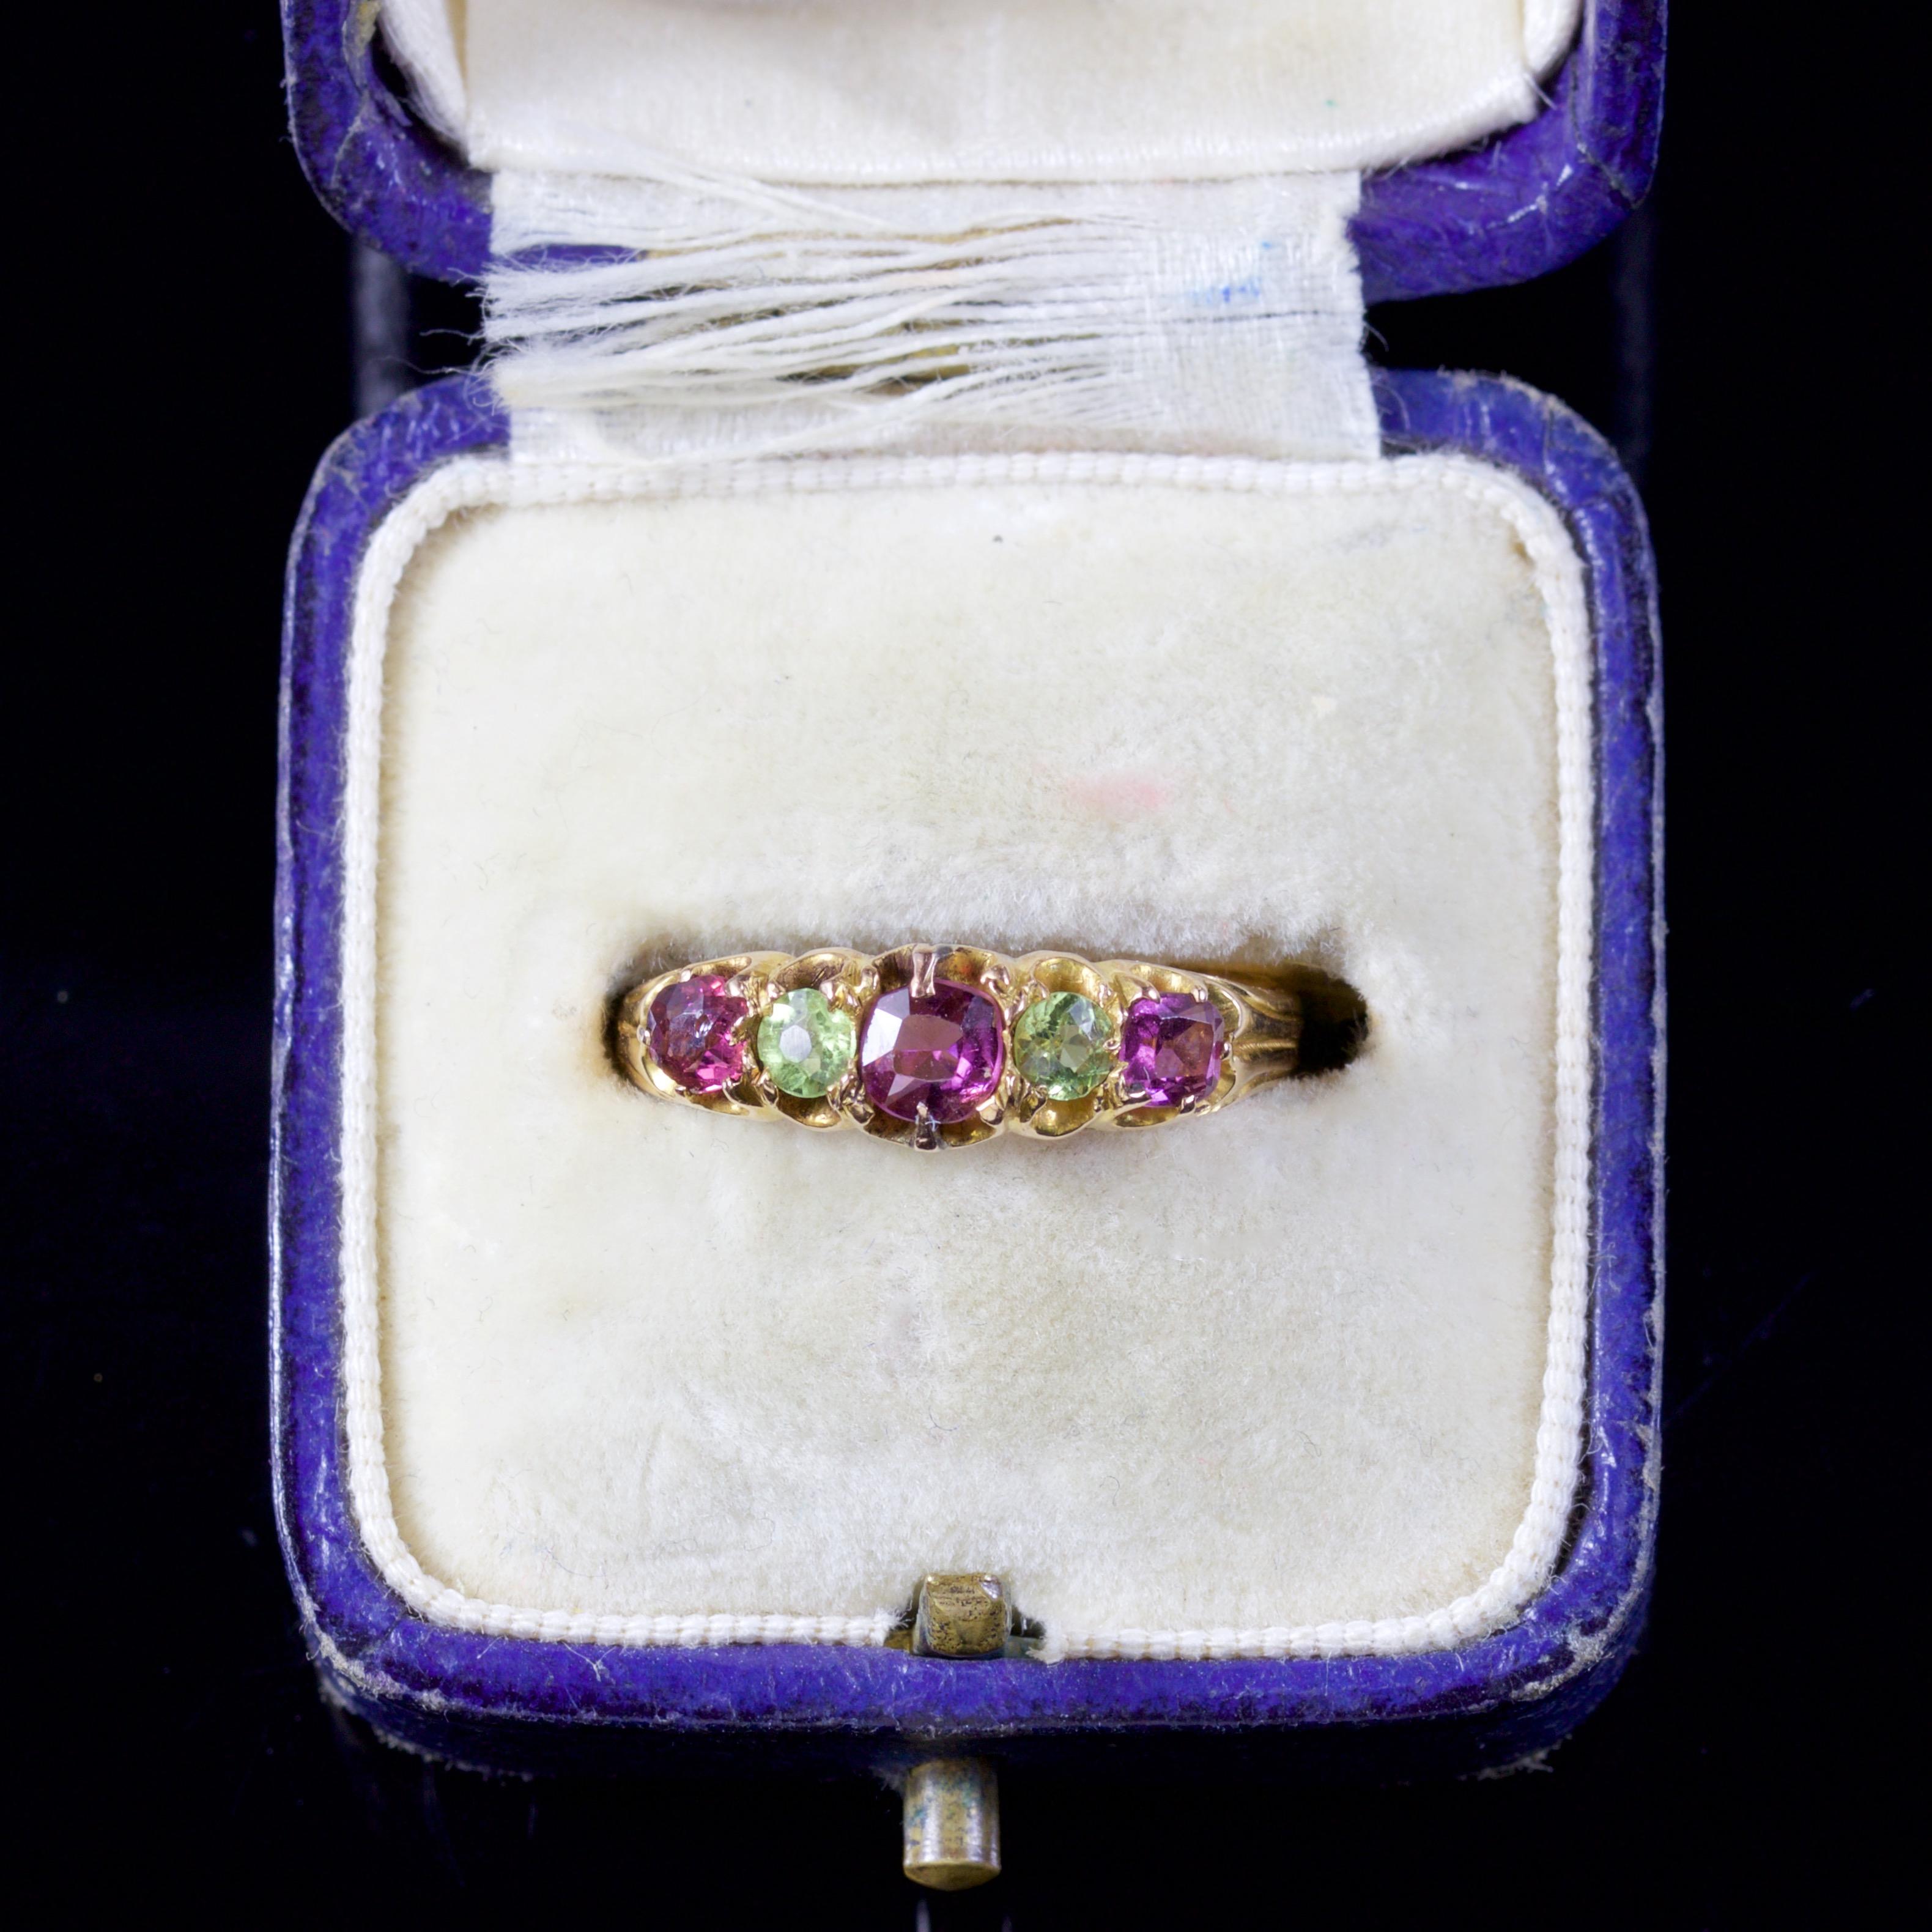 Antique Victorian Suffragette Amethyst Peridot Ring 15 Carat Gold, circa 1900 For Sale 2